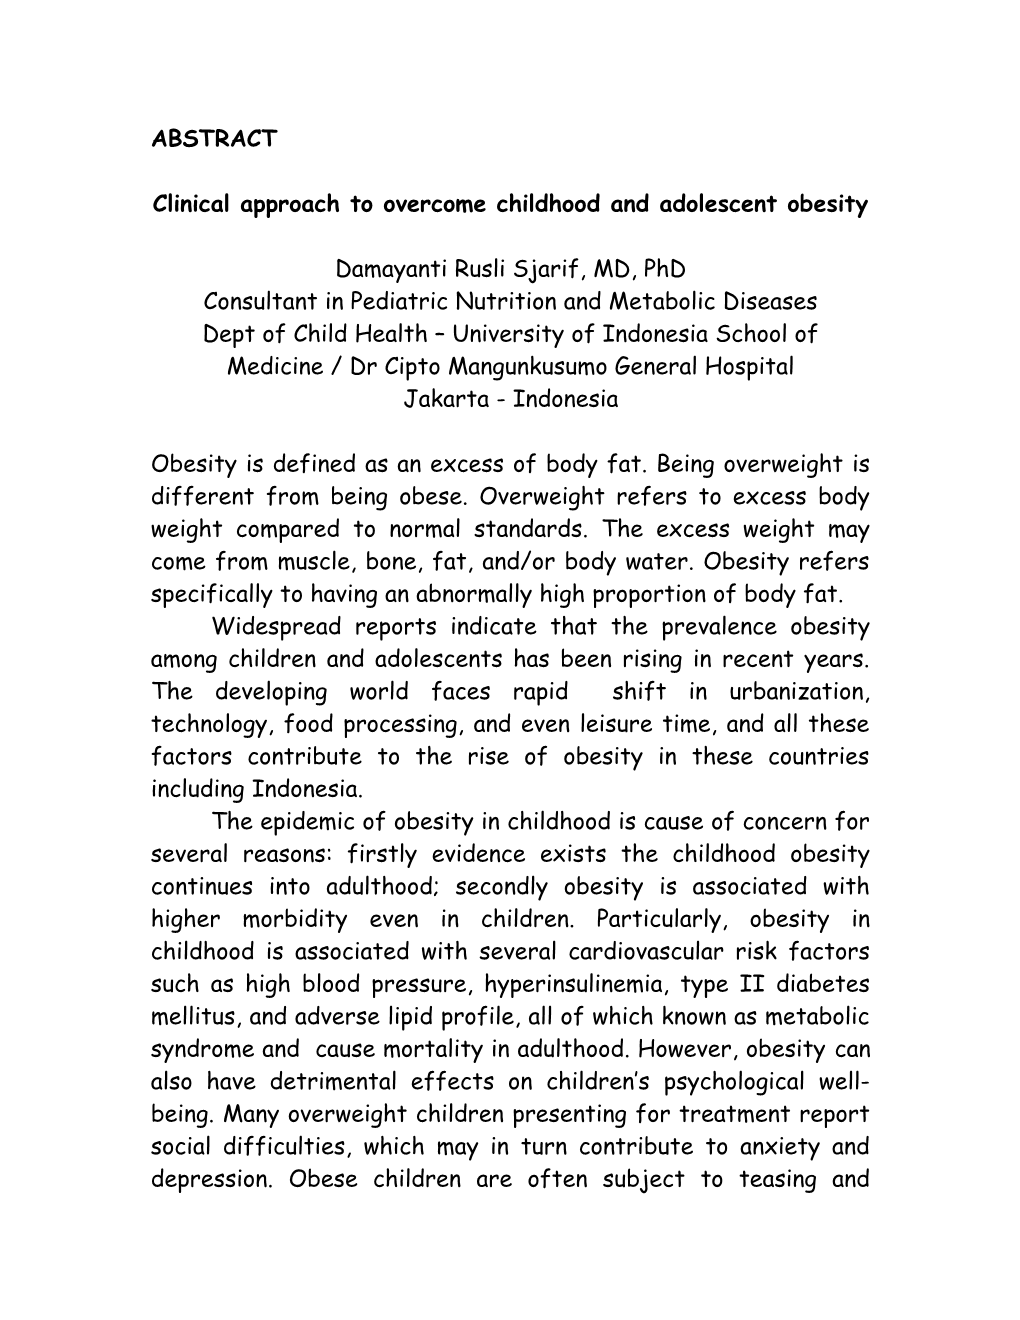 Widespread Reports Indicate That the Prevalence Obesity Among Children and Adolescents